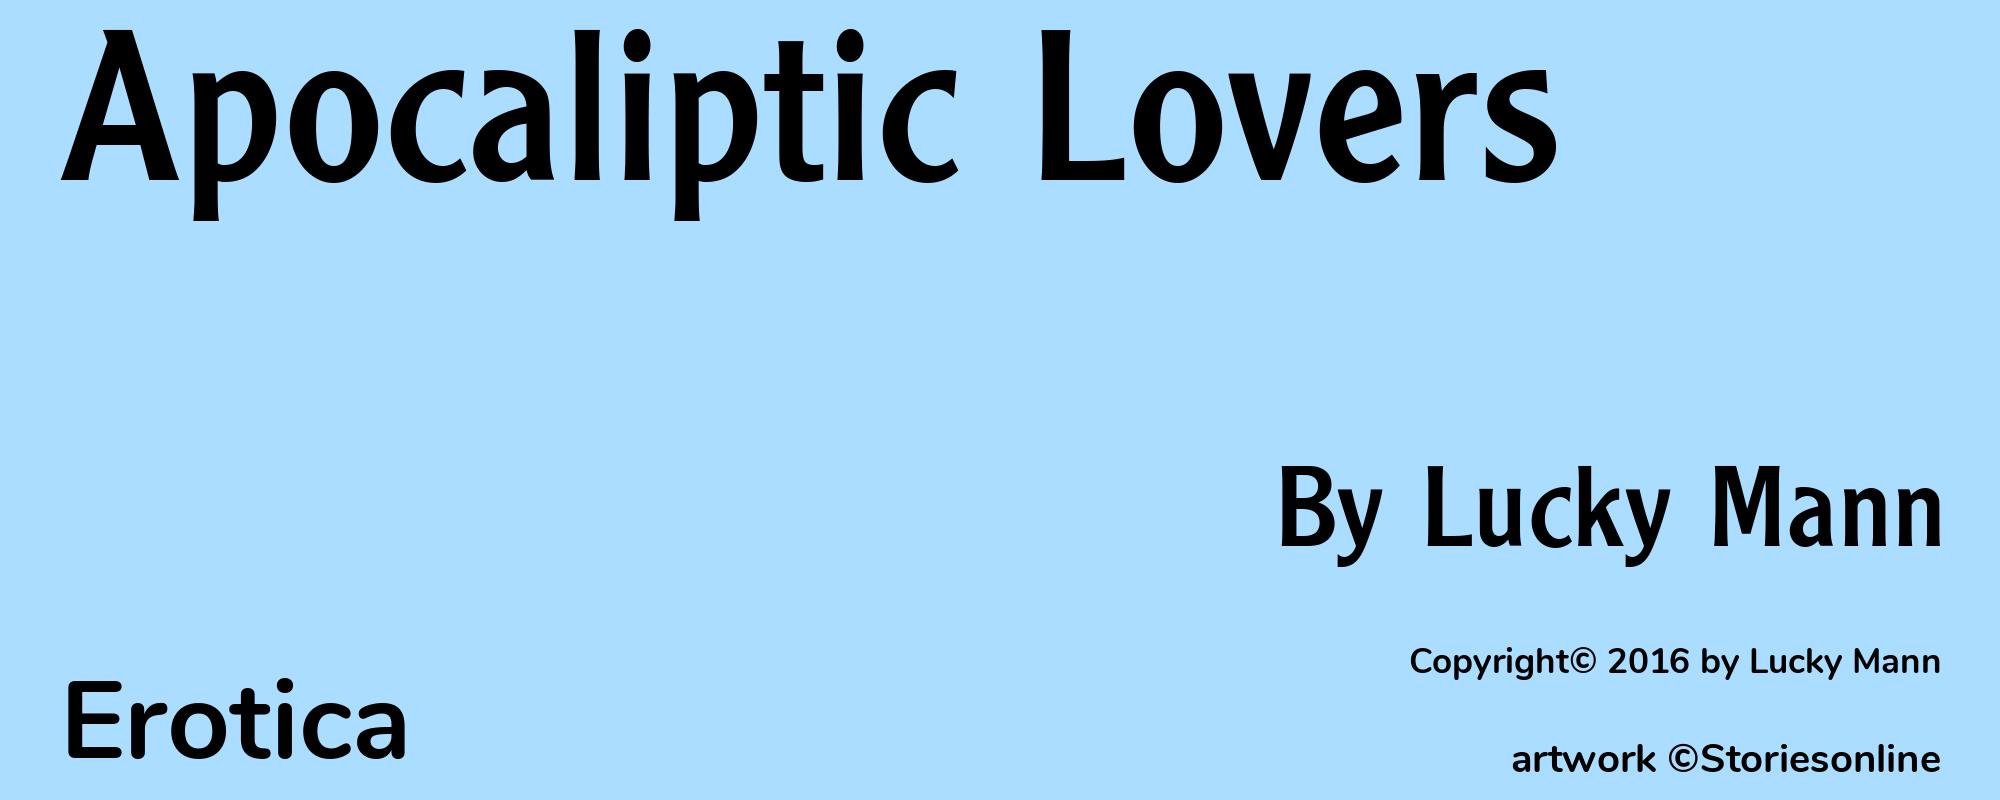 Apocaliptic Lovers - Cover